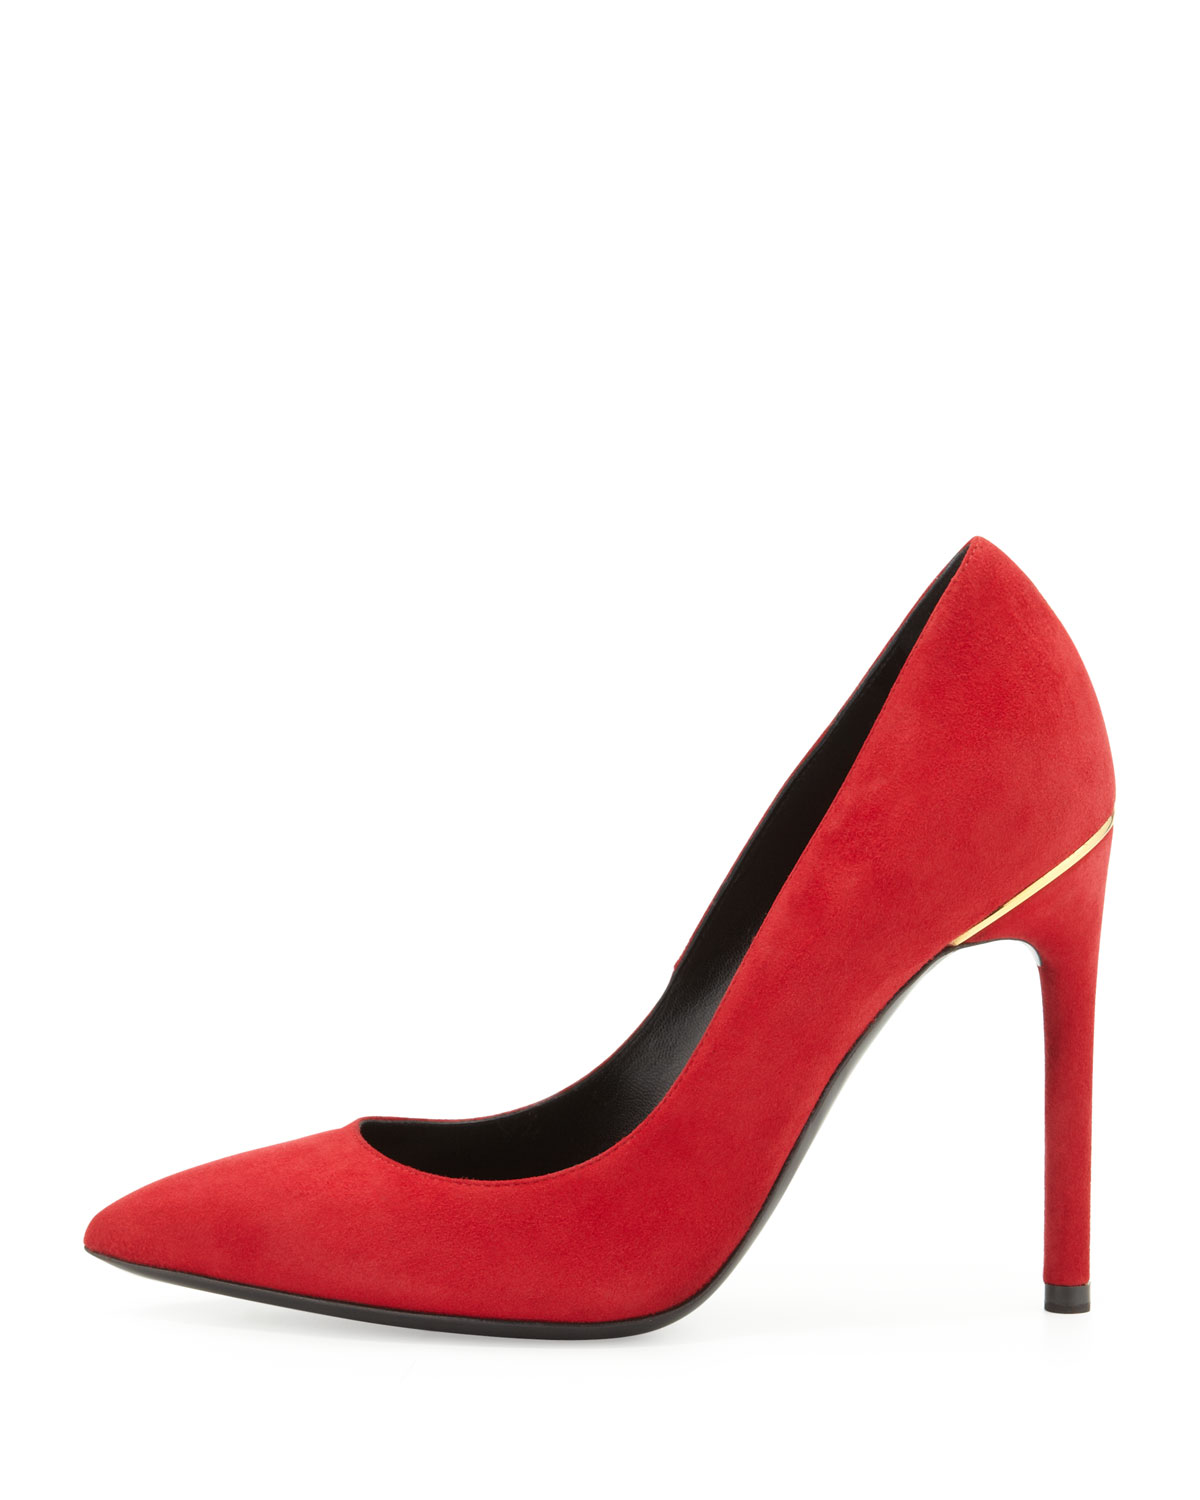 Lyst - Tom ford Suede Pointedtoe Signature Pump Scarlet in Red